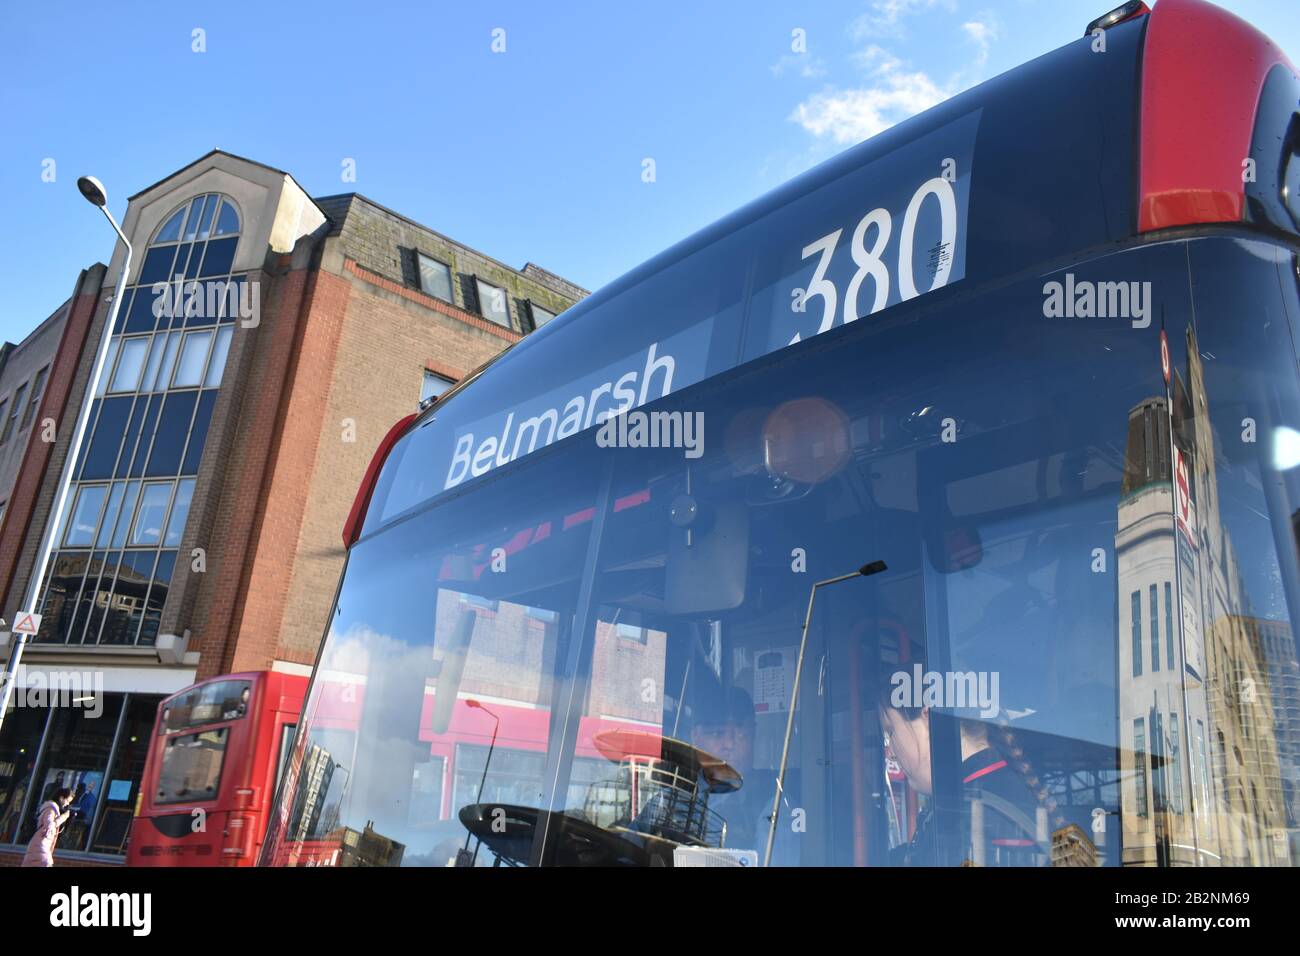 London/UK - February 2020: Belmarsh 380 Bus, outside Woolwich Arsenal, the week where journalist Julian Assange is at court in an extradition trial. Stock Photo